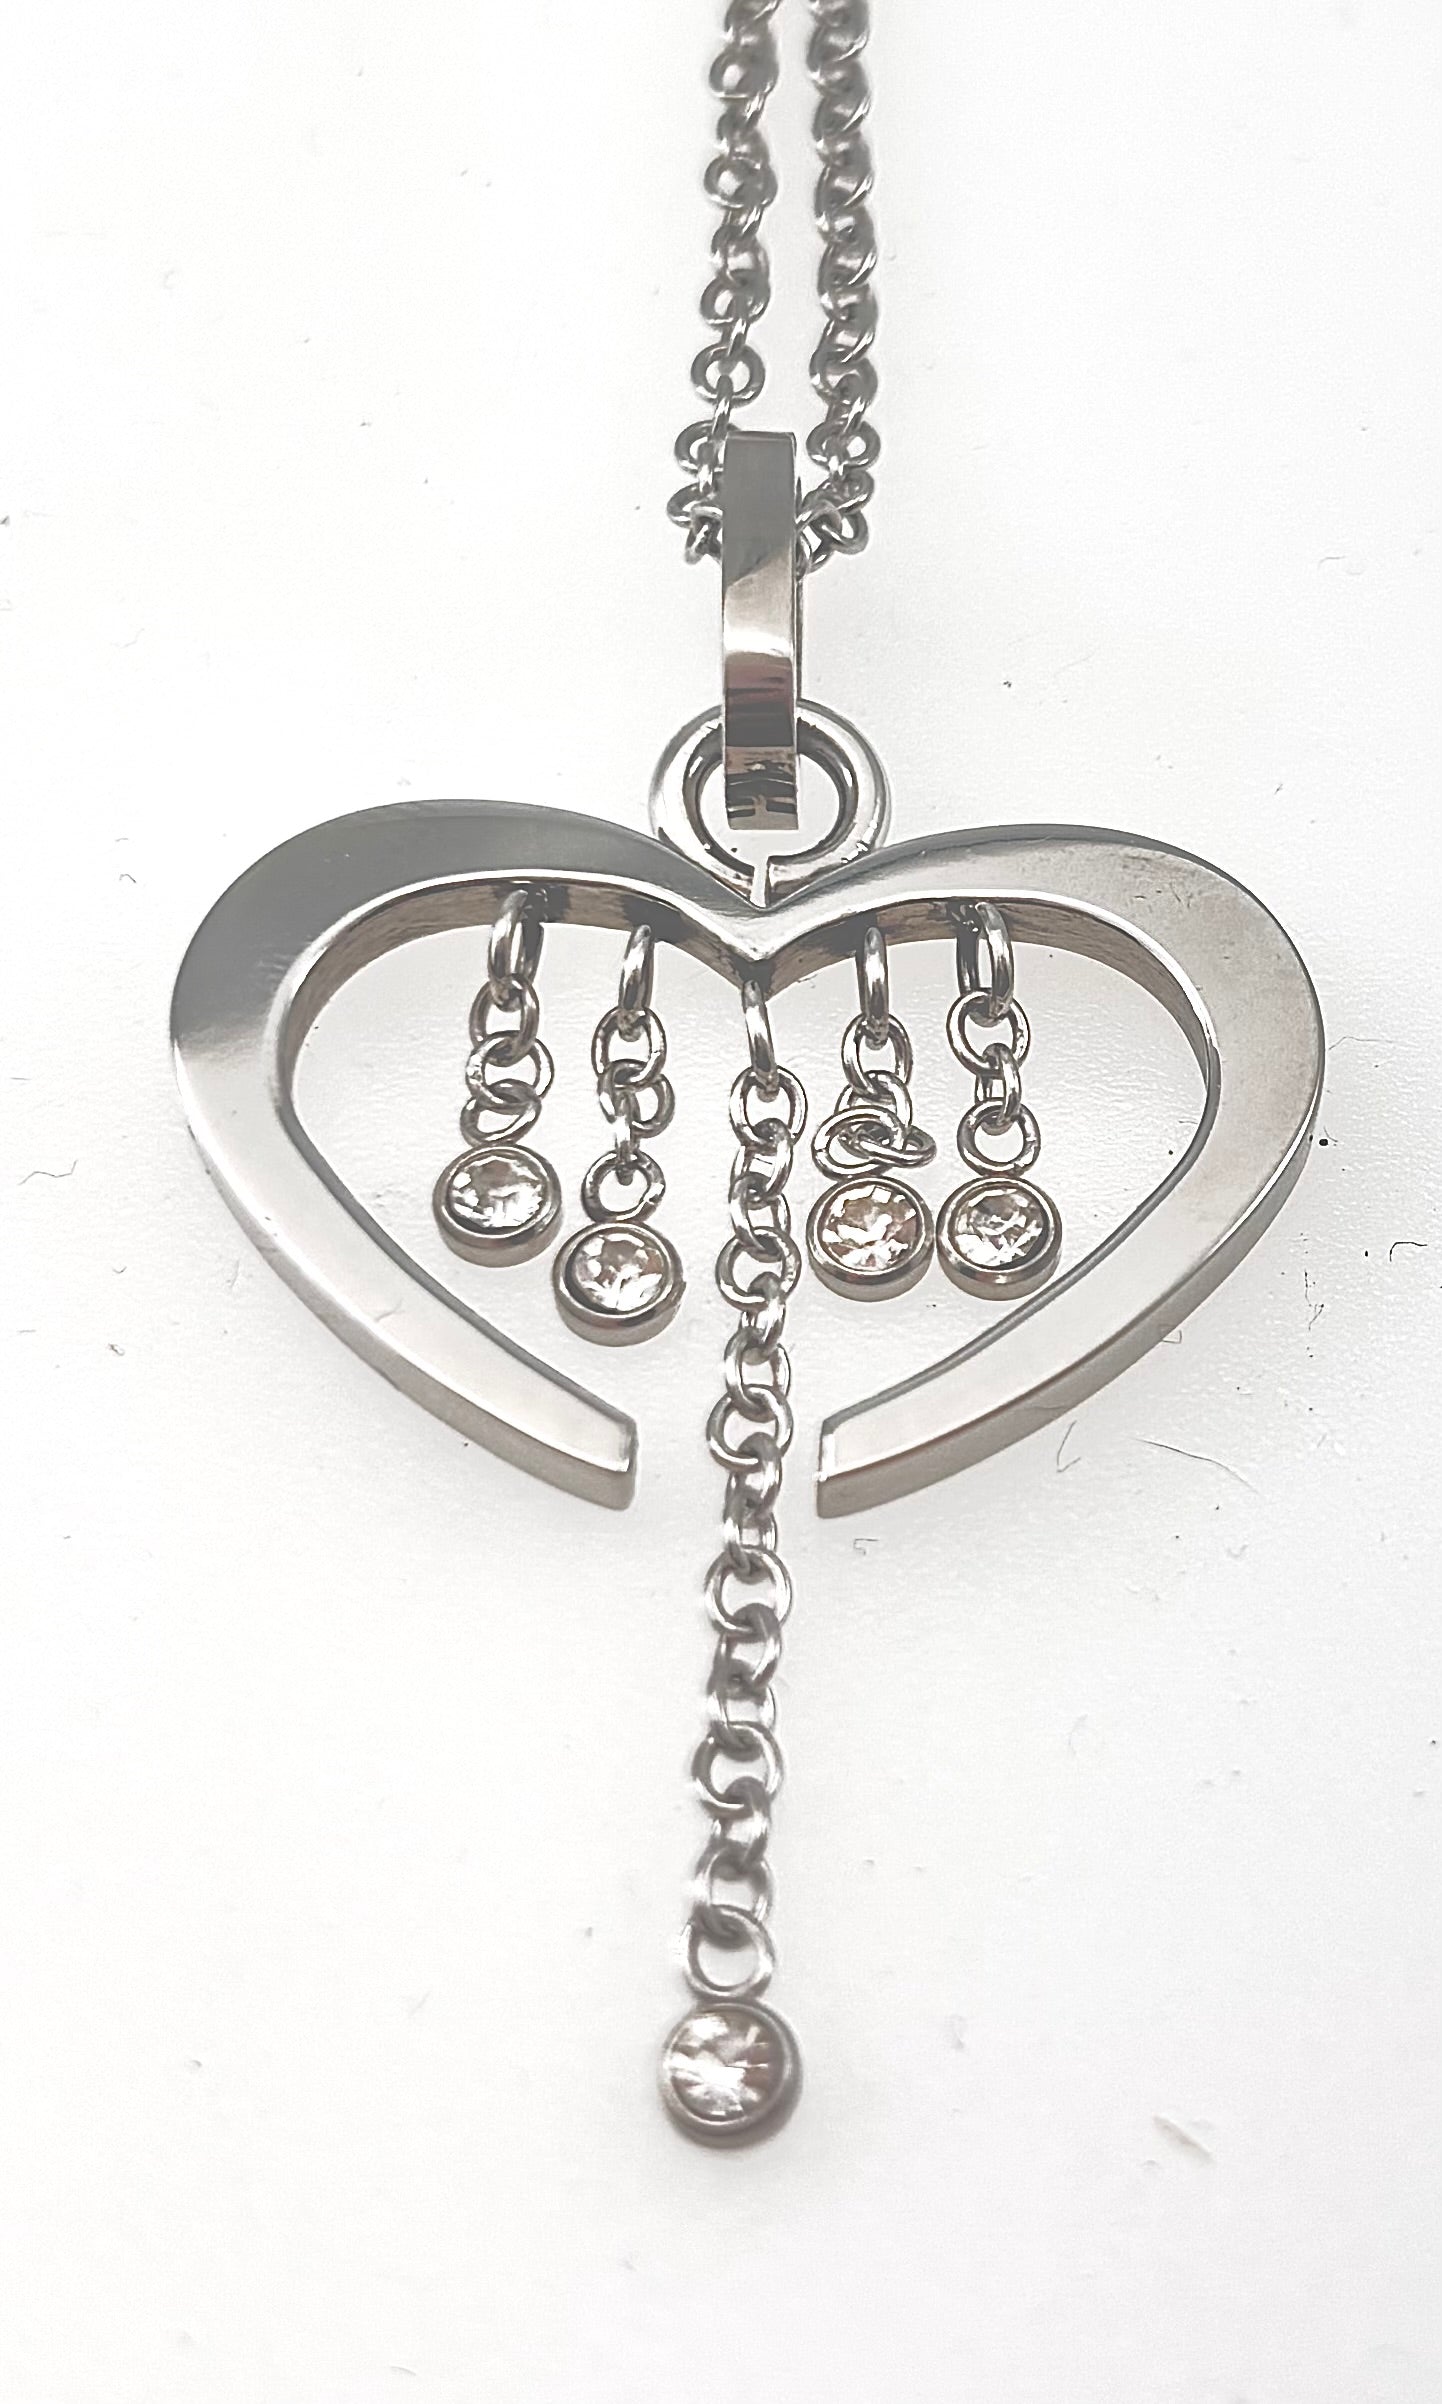 JEWELRY OPEN HEART WITH DANGLES CRYSTAL PENDANT AND BALL CHAIN 18"